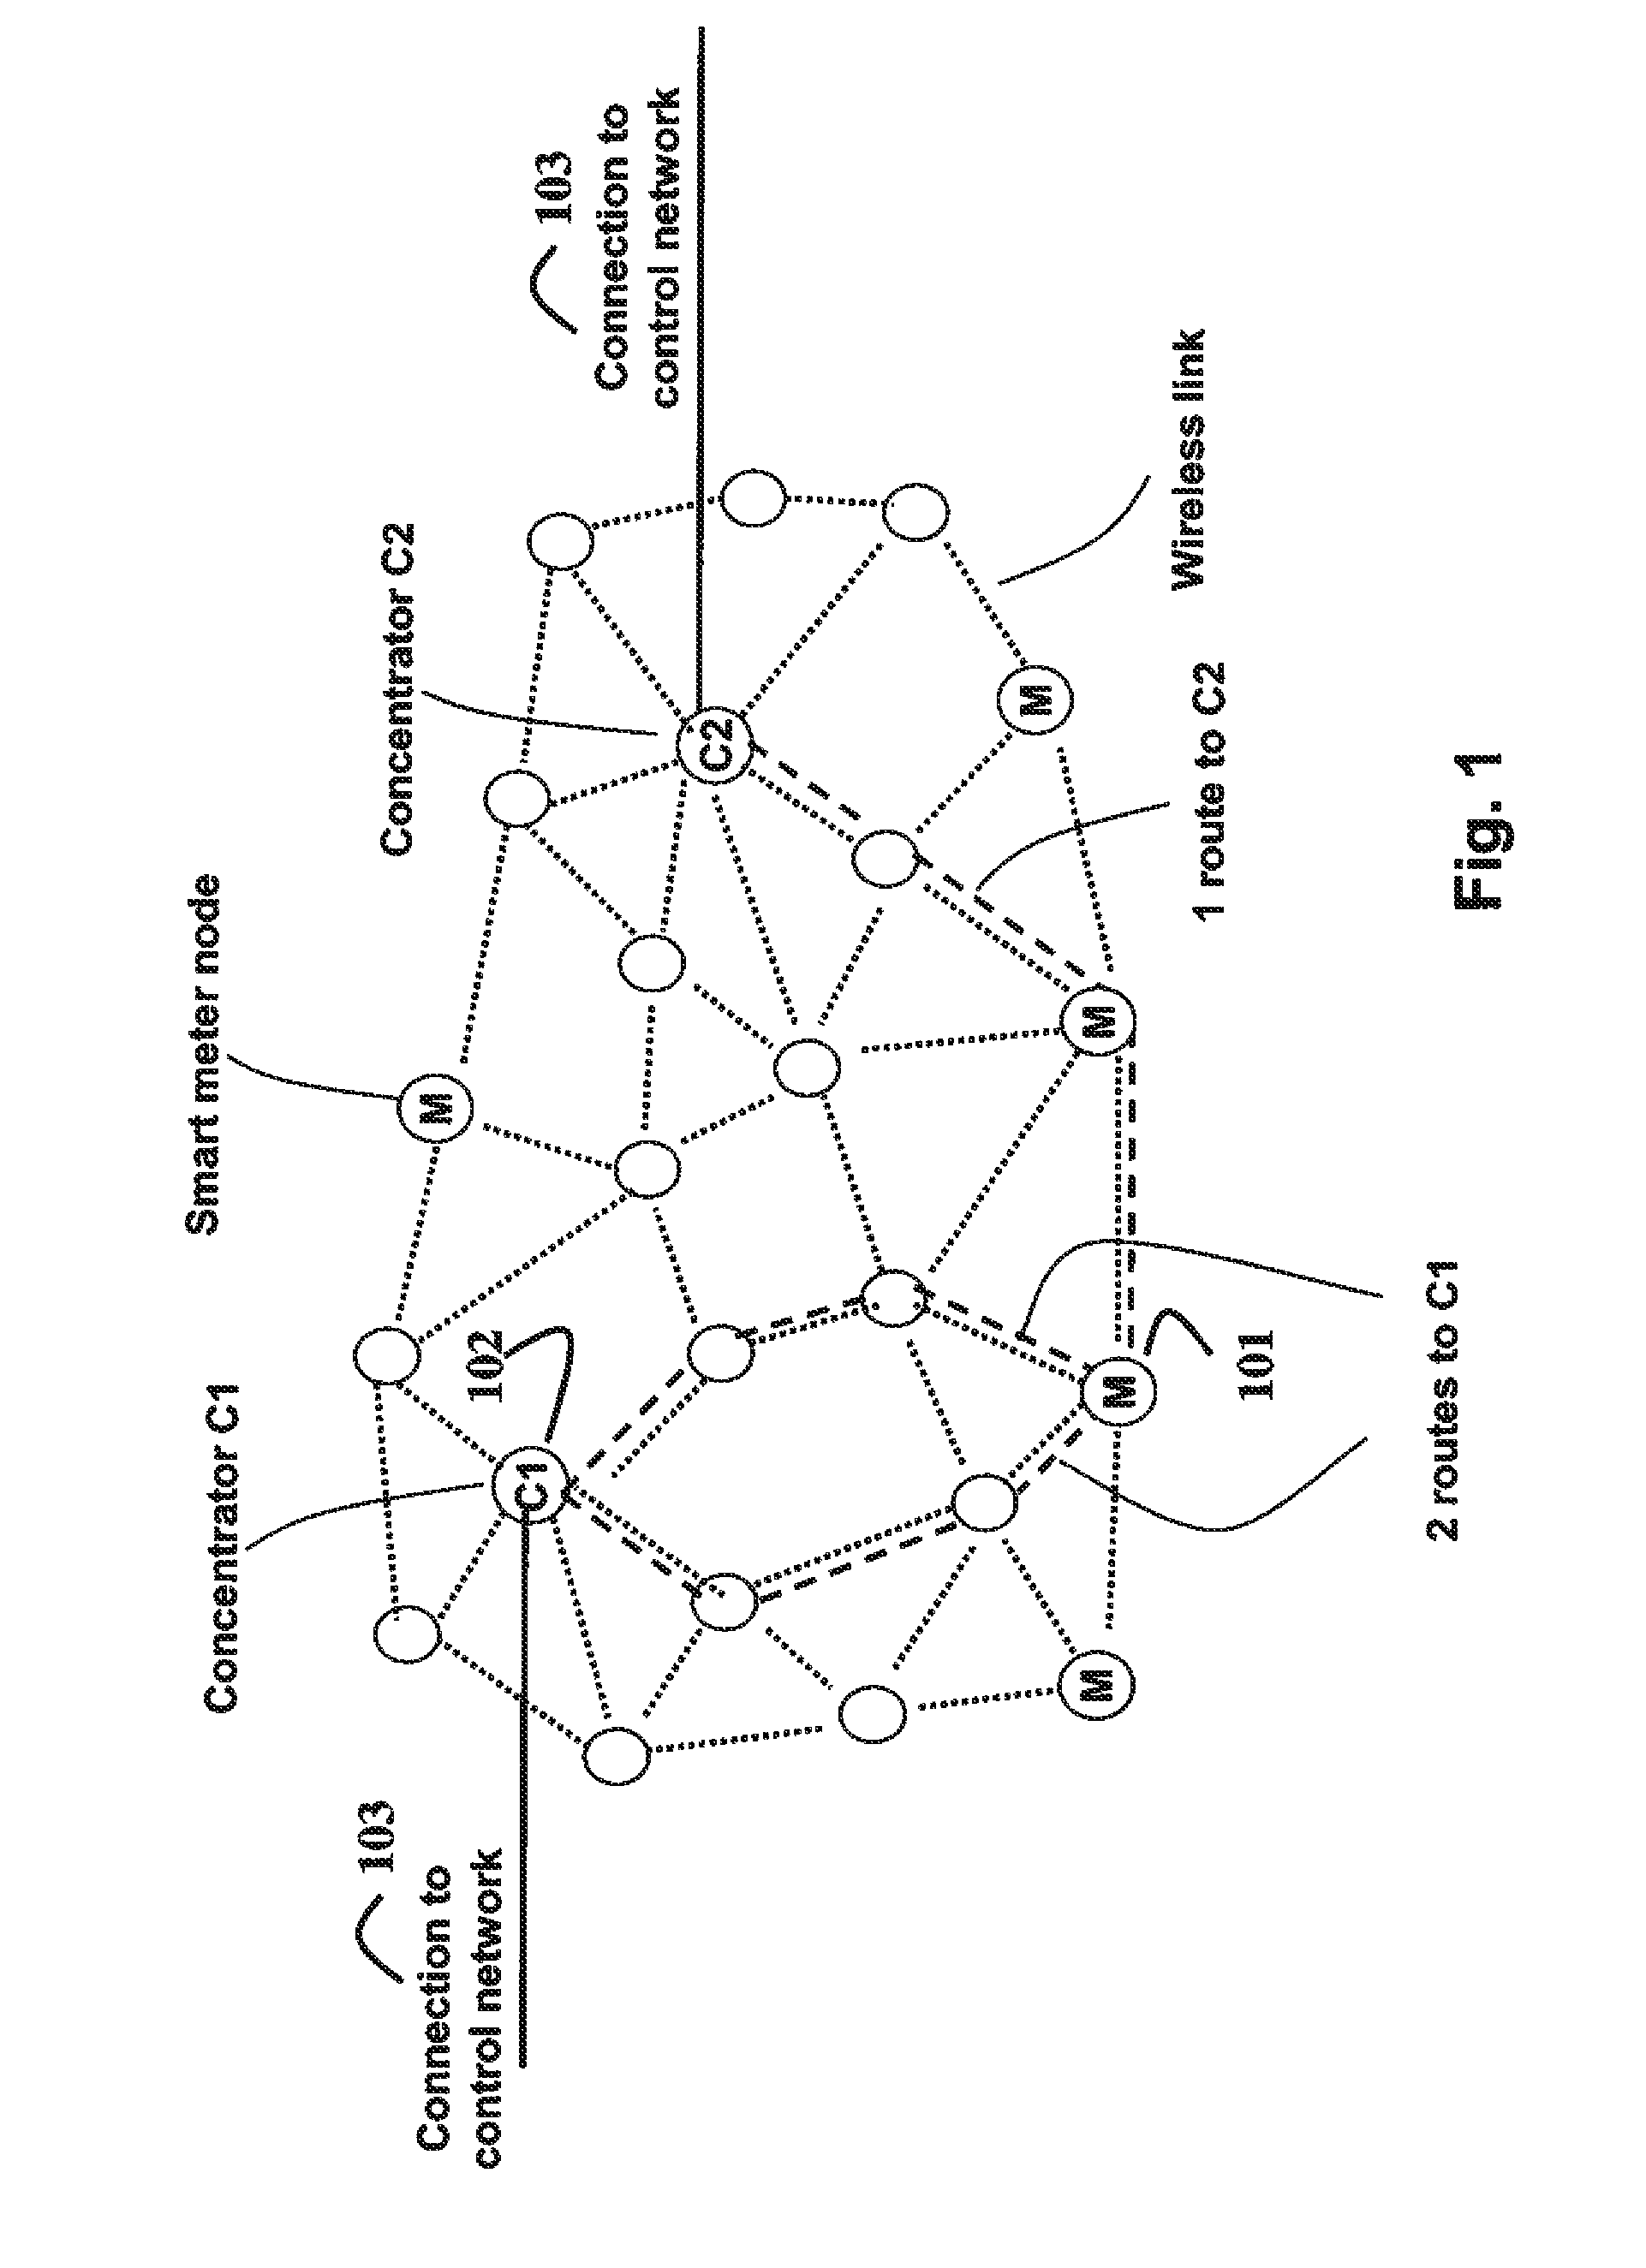 Method for discovering and maintaining routes in smart meter networks